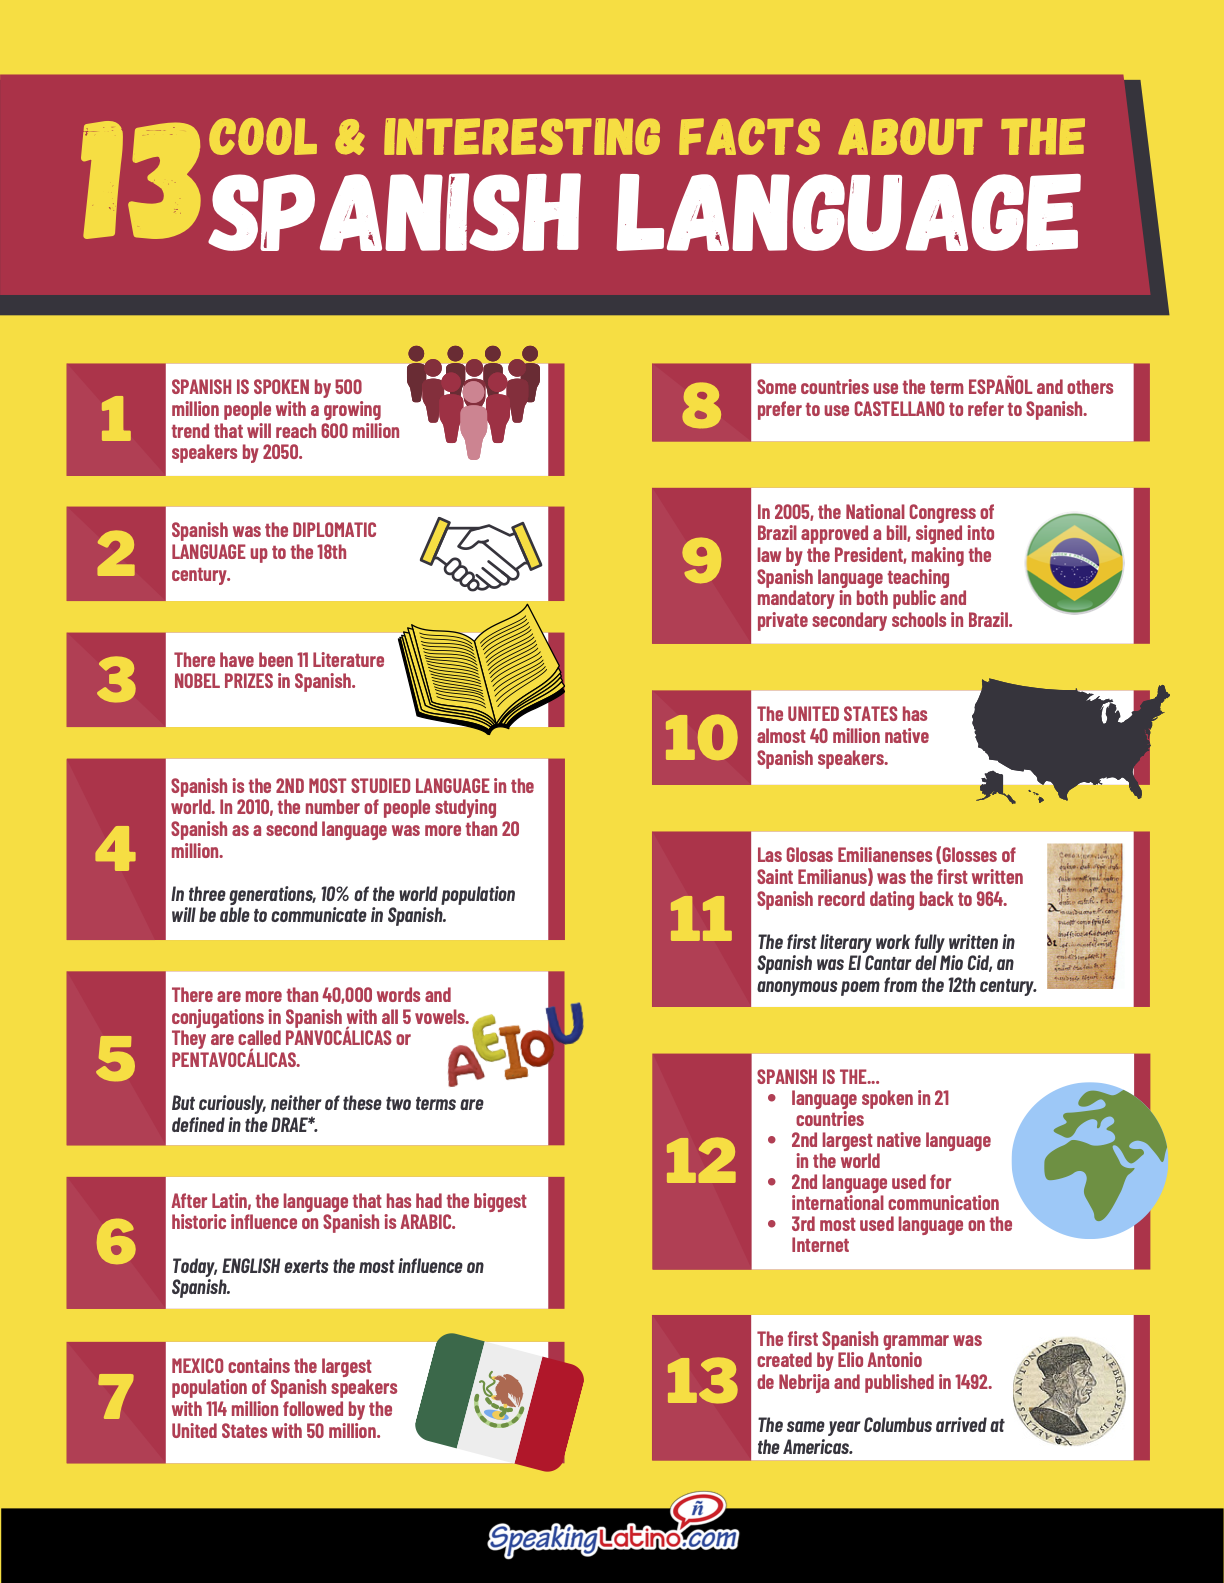 Days Of The Week In Spanish & 5 Amazing Facts About Spain